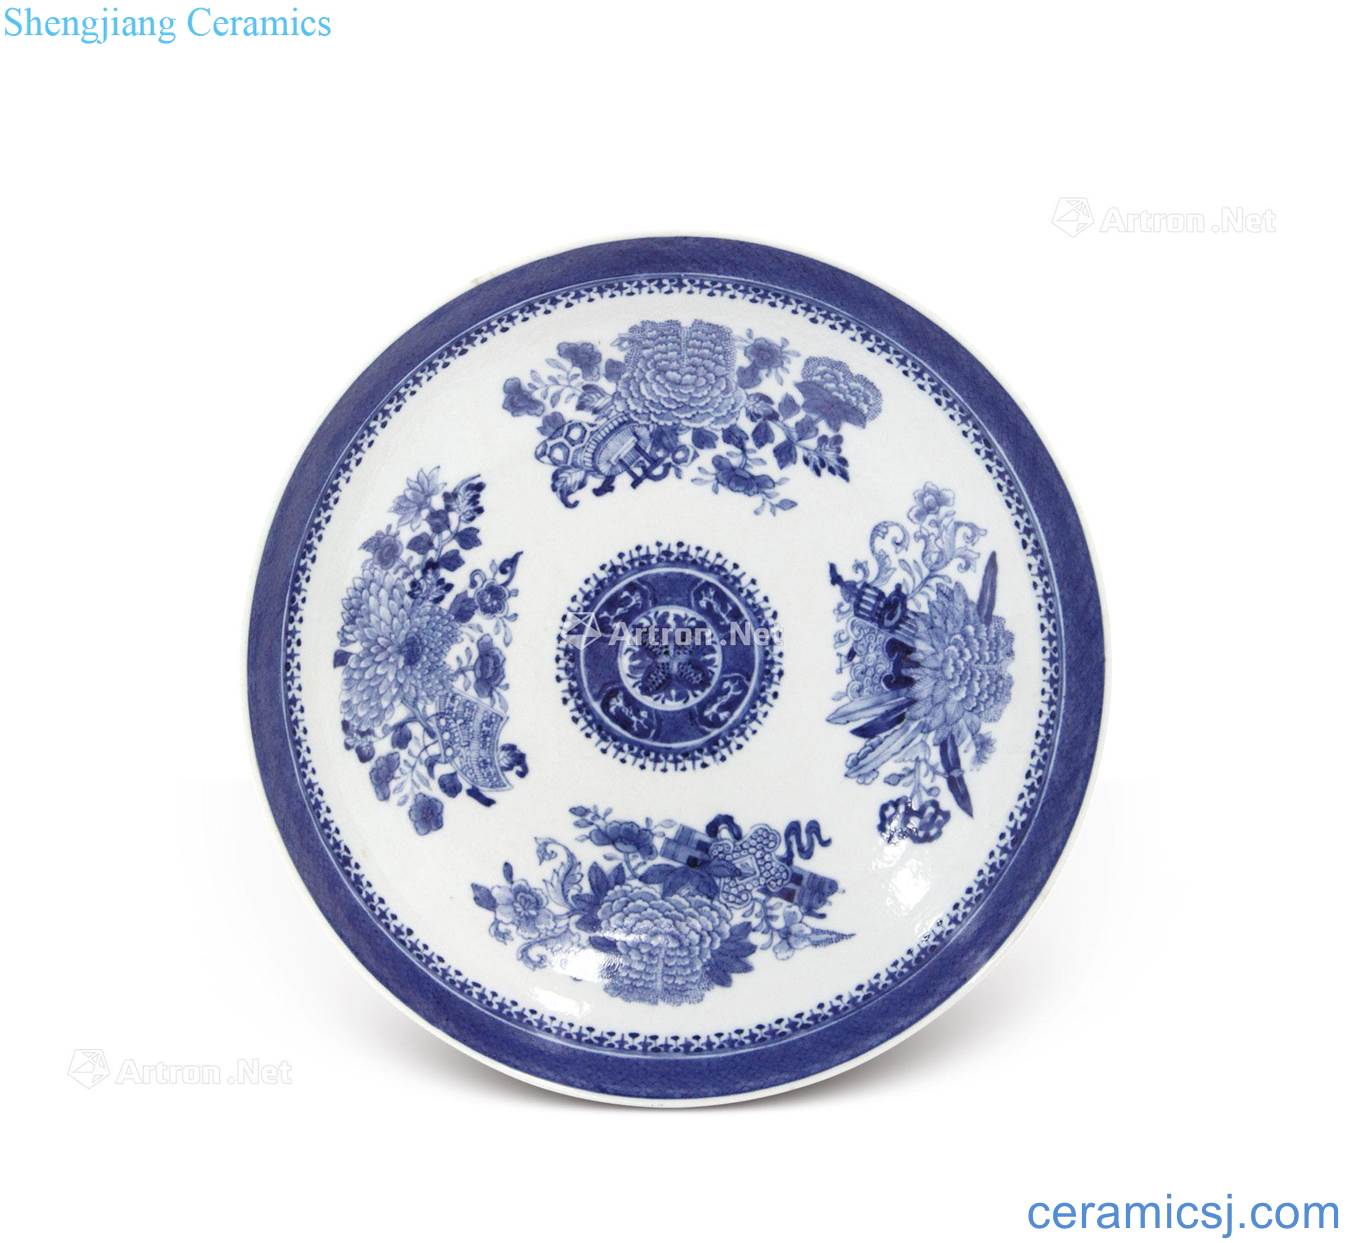 Qing dynasty blue and white pattern plate